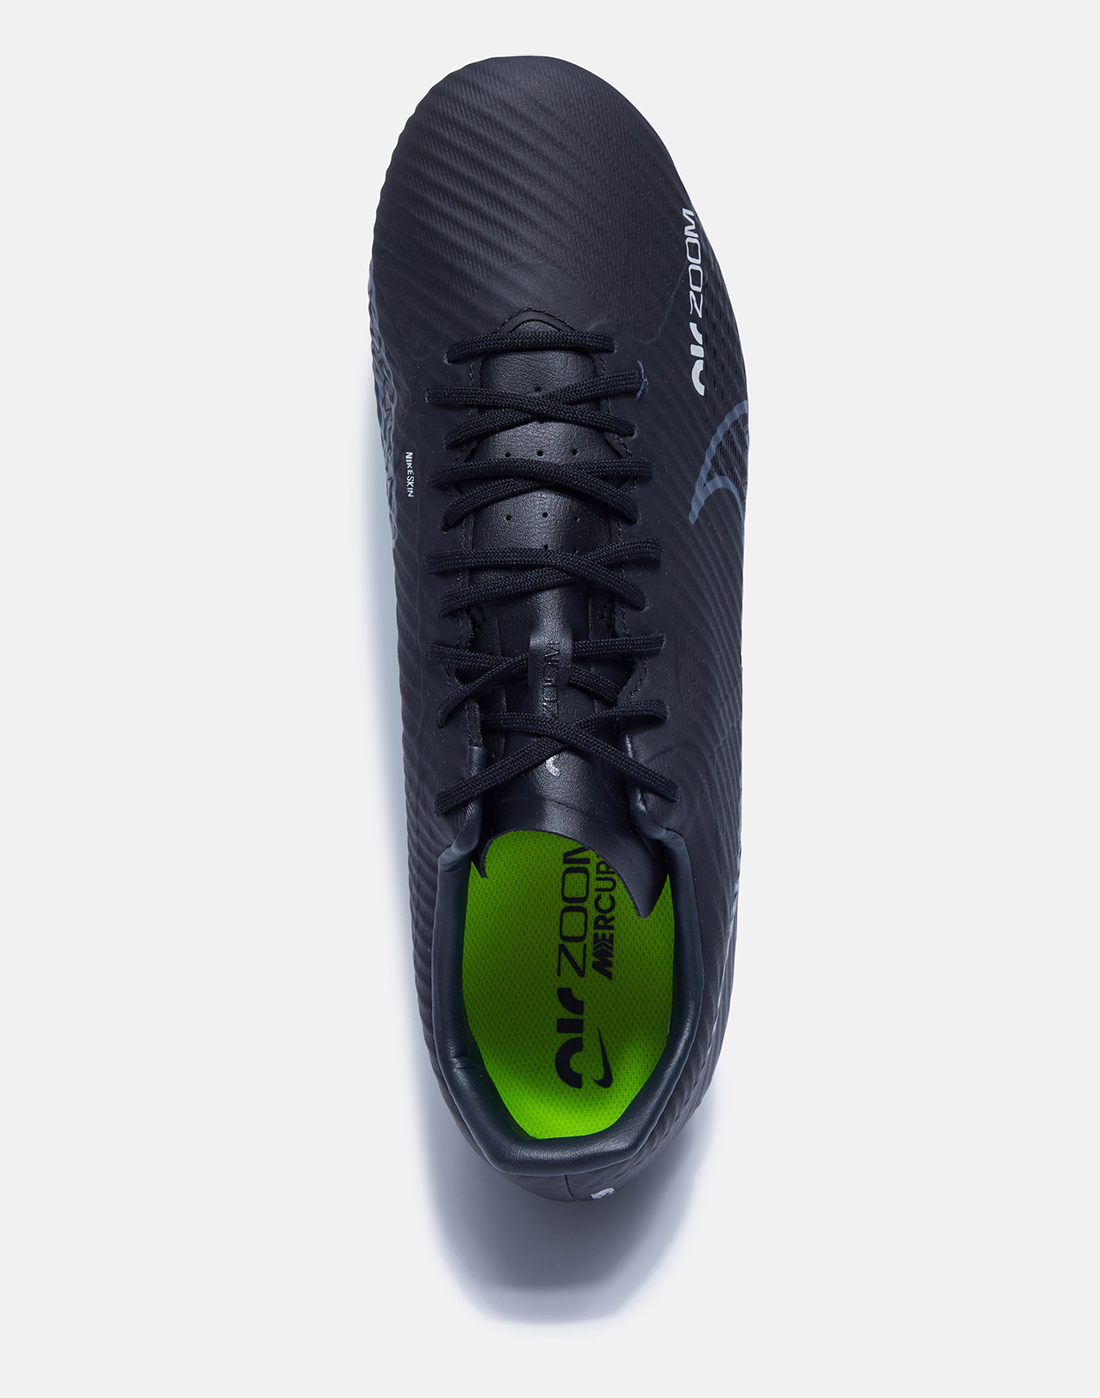 Nike Adults Mercurial Zoom Vapor 15 Academy Firm Ground - Black | Life ...